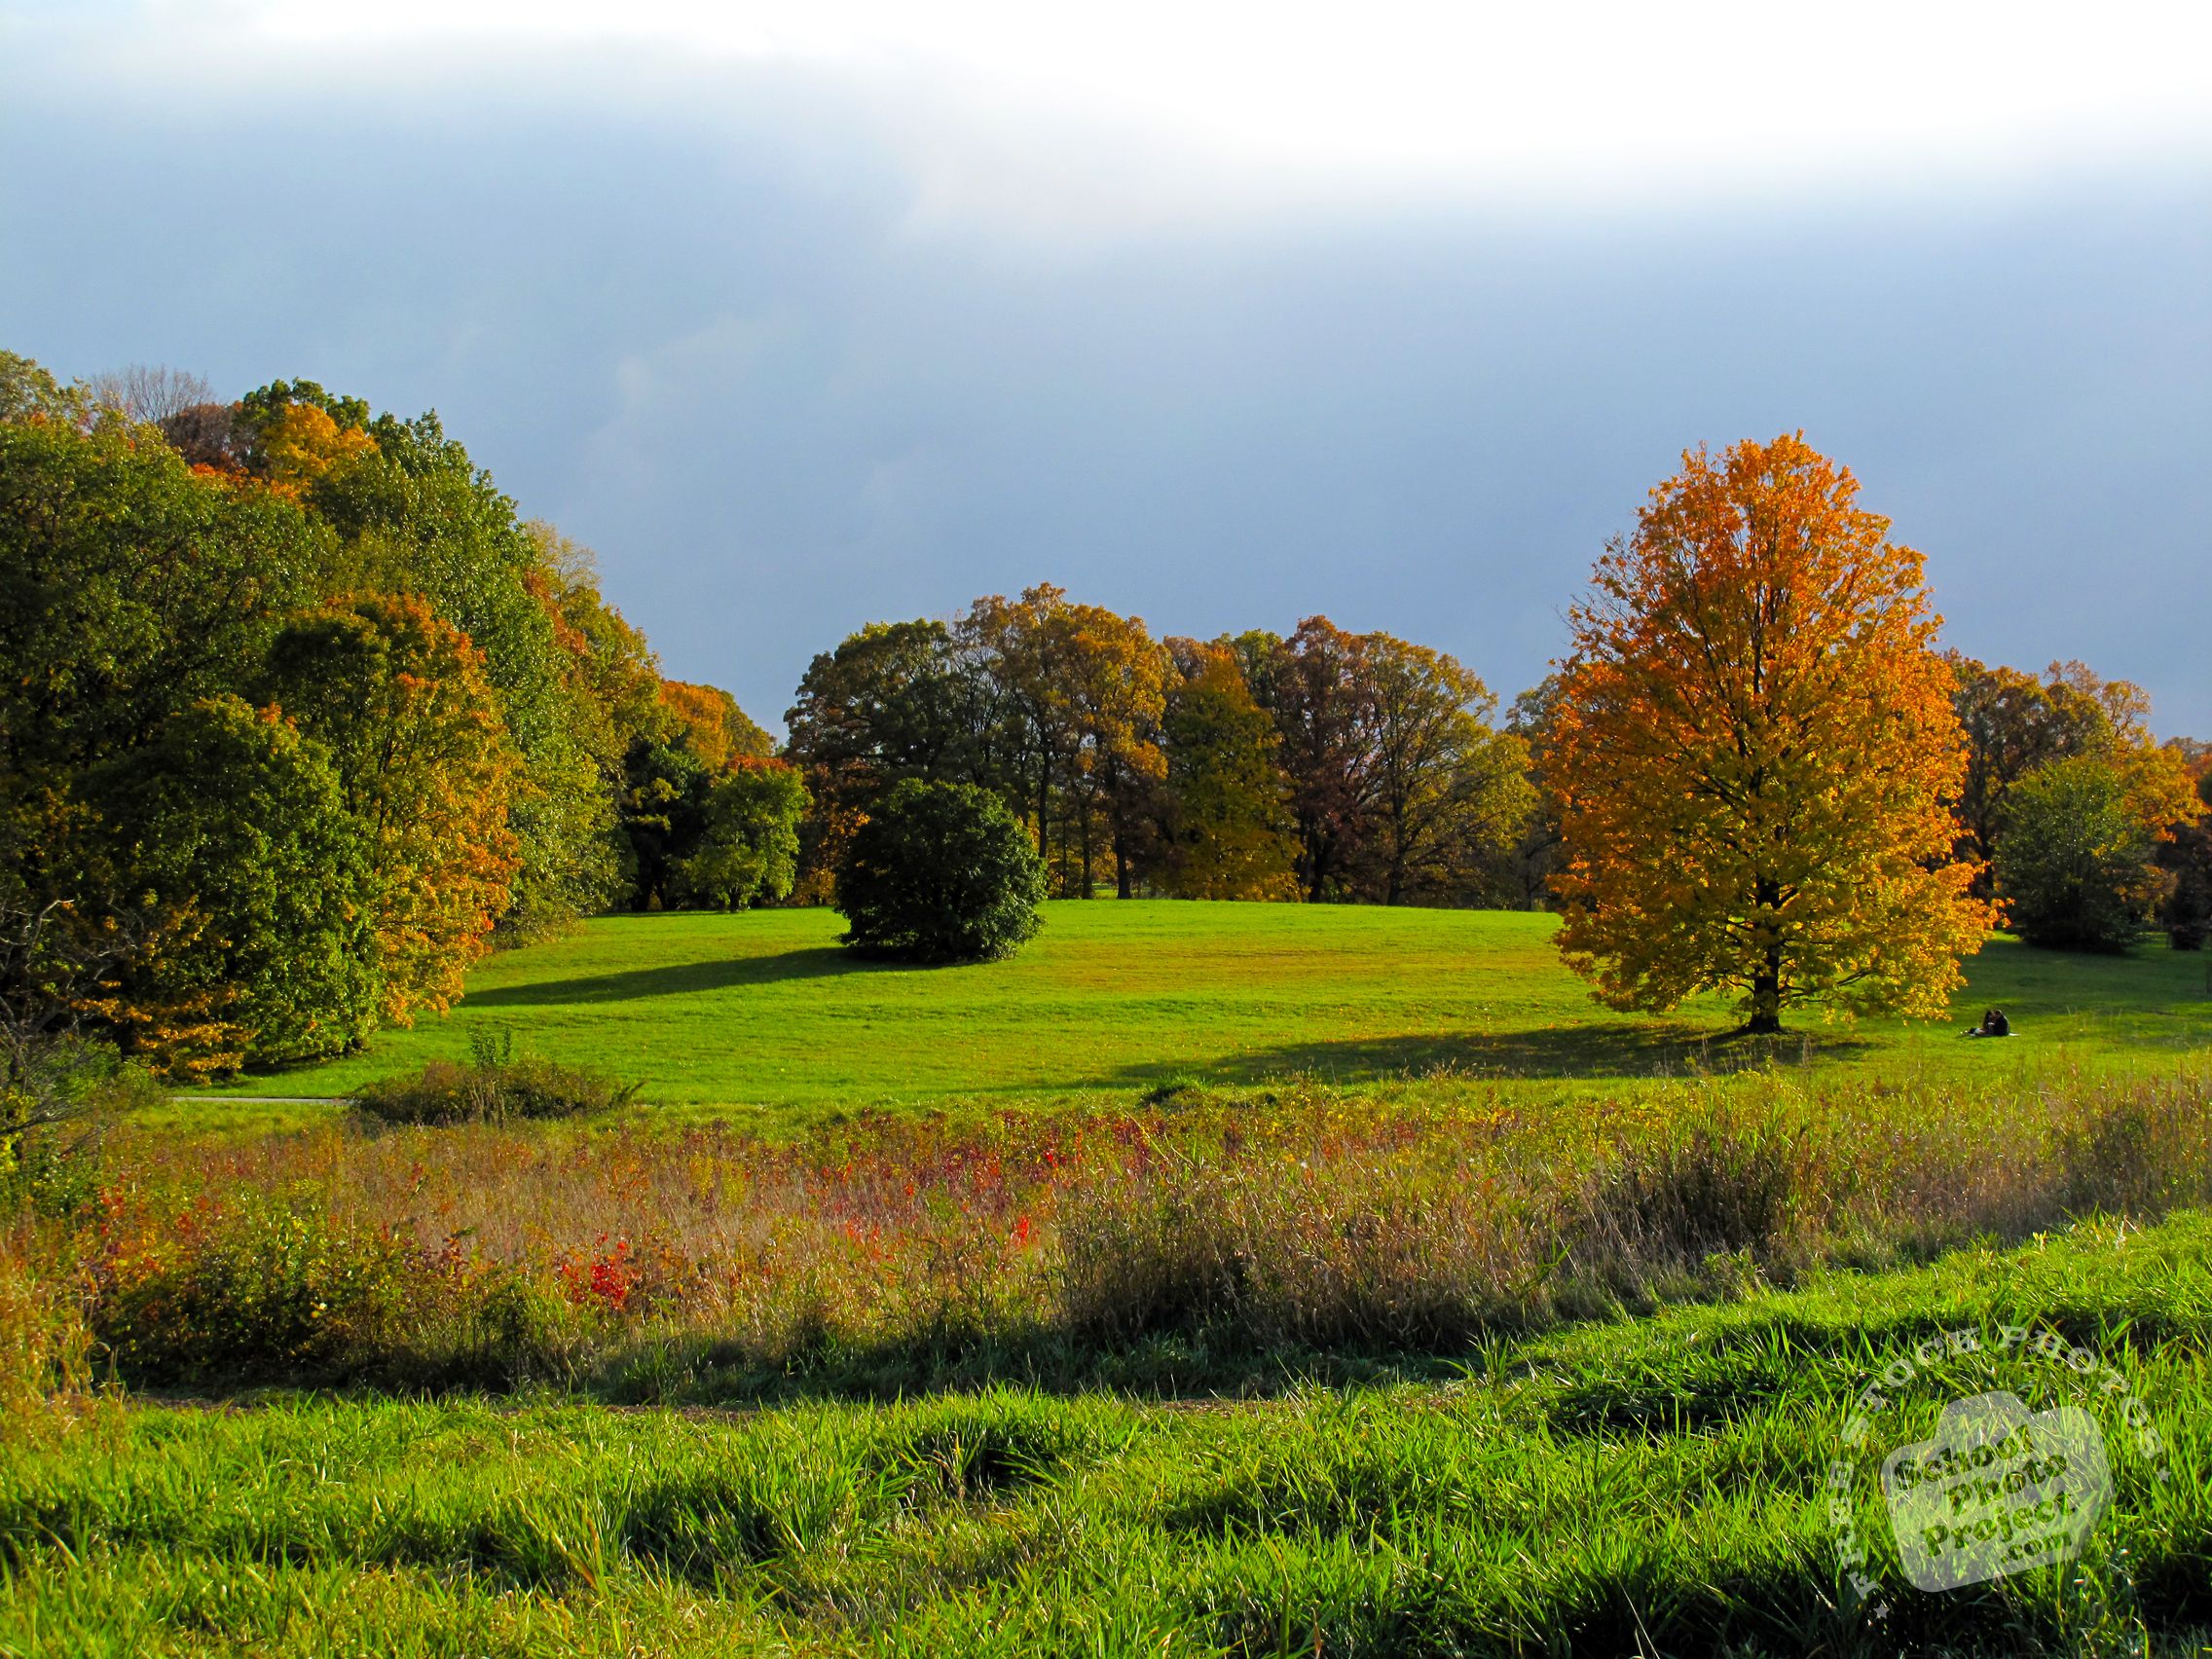 FREE Autumn Scenery Photo, Fall Foliage Picture, Beautiful Panorama, Royalty Free Landscape , Image, Picture, Photography